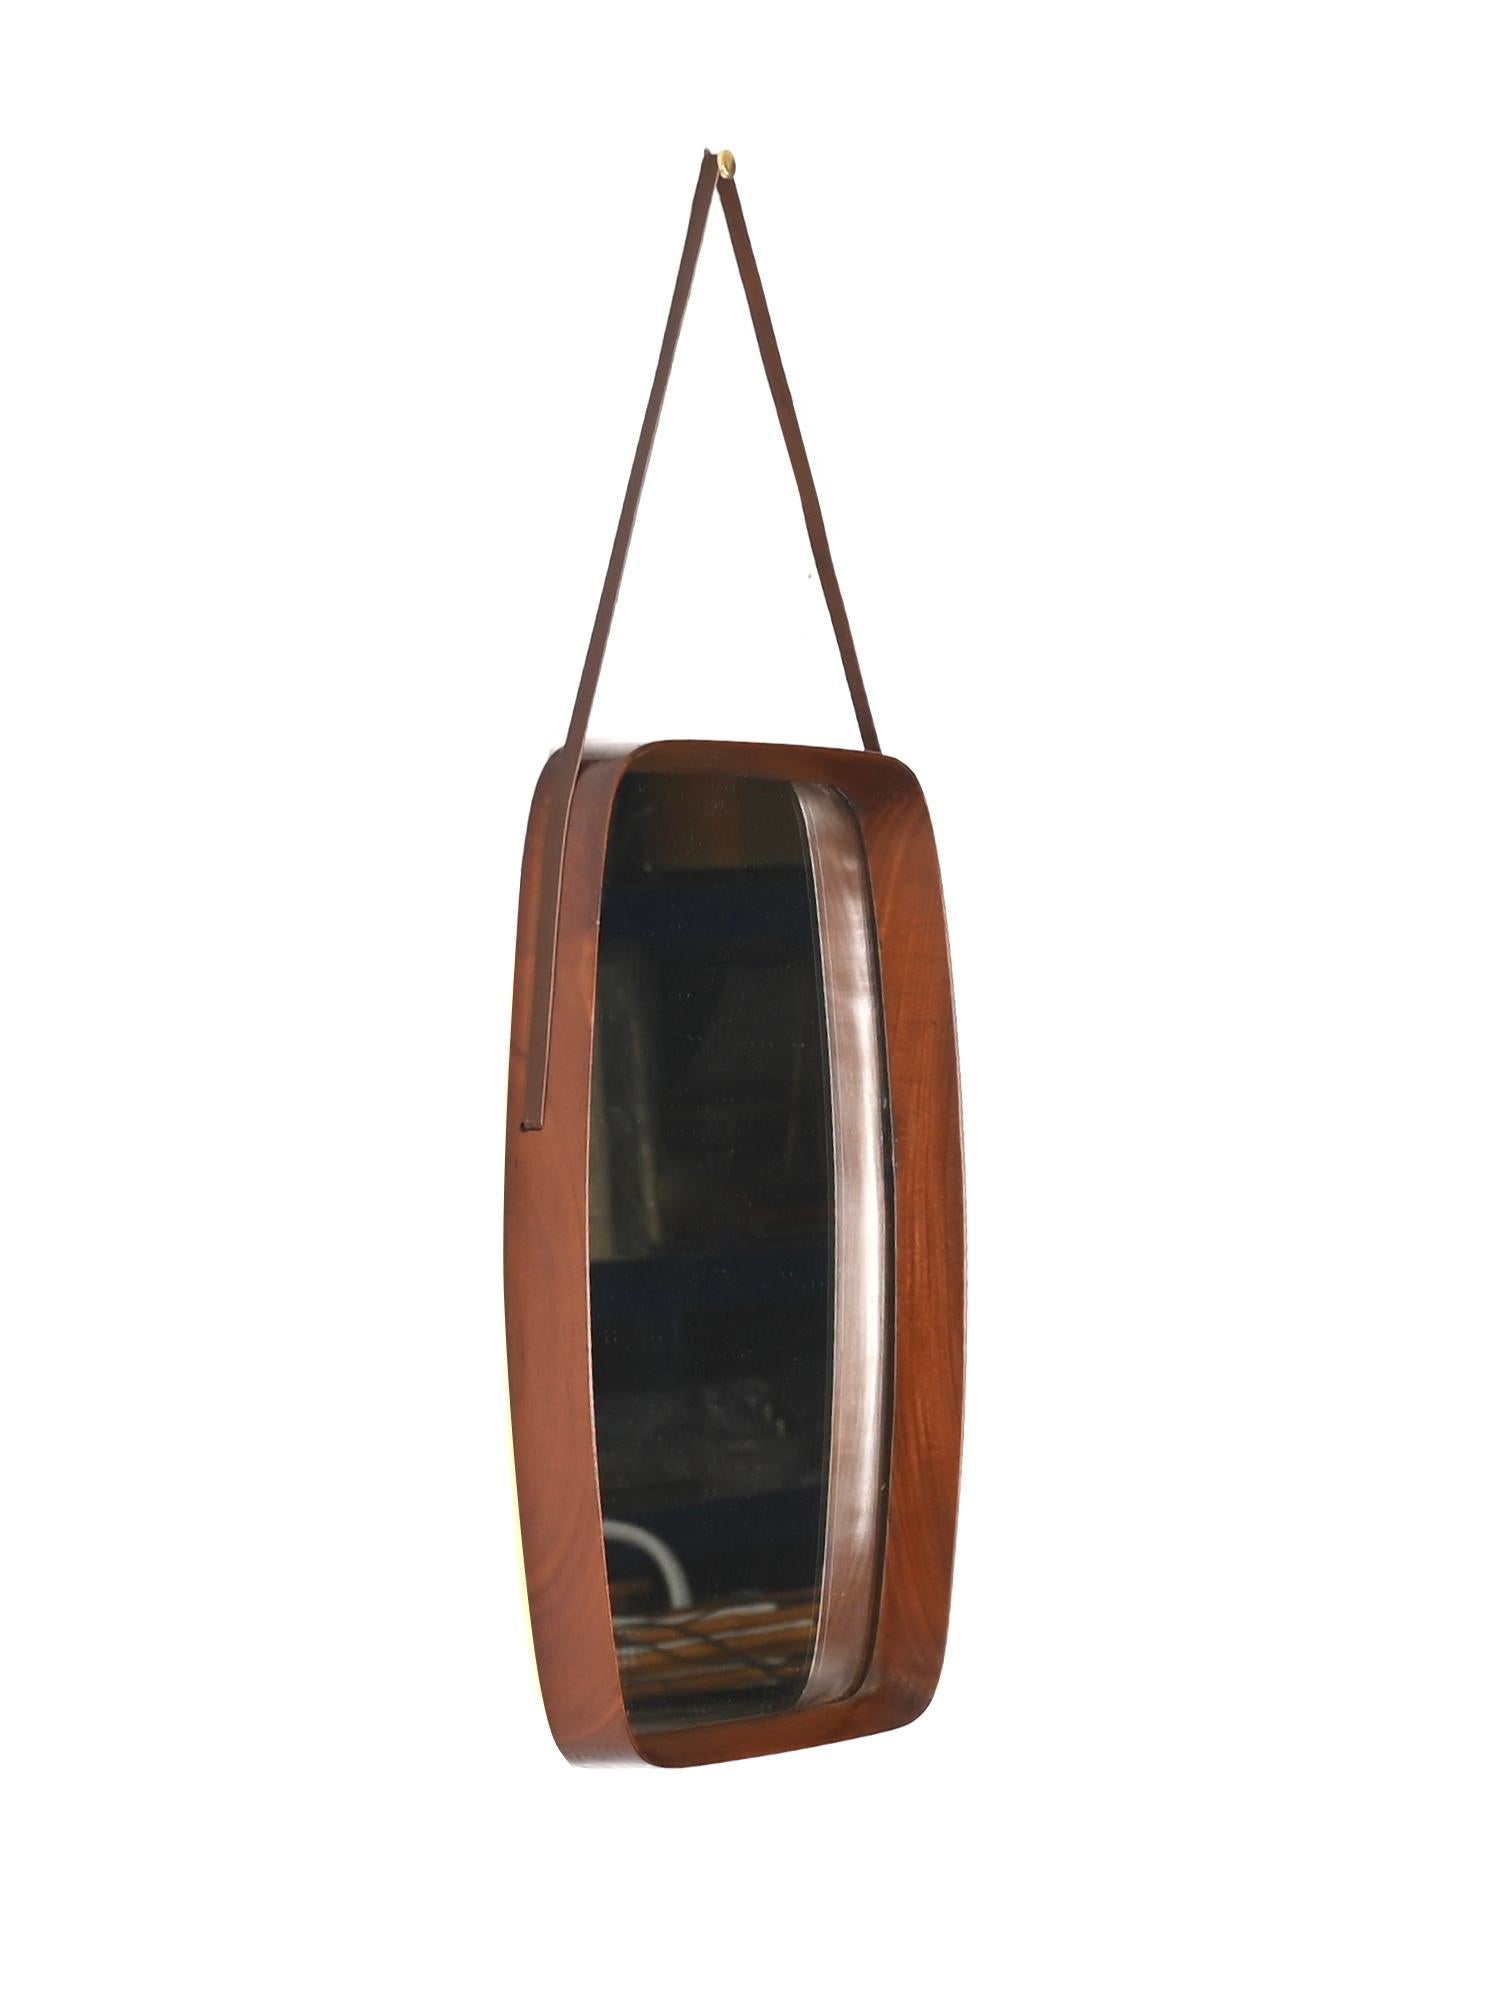 Mid-Century Rectangular Mirror in Teak, Leather by Campo & Graffi, Italy 1960s For Sale 2